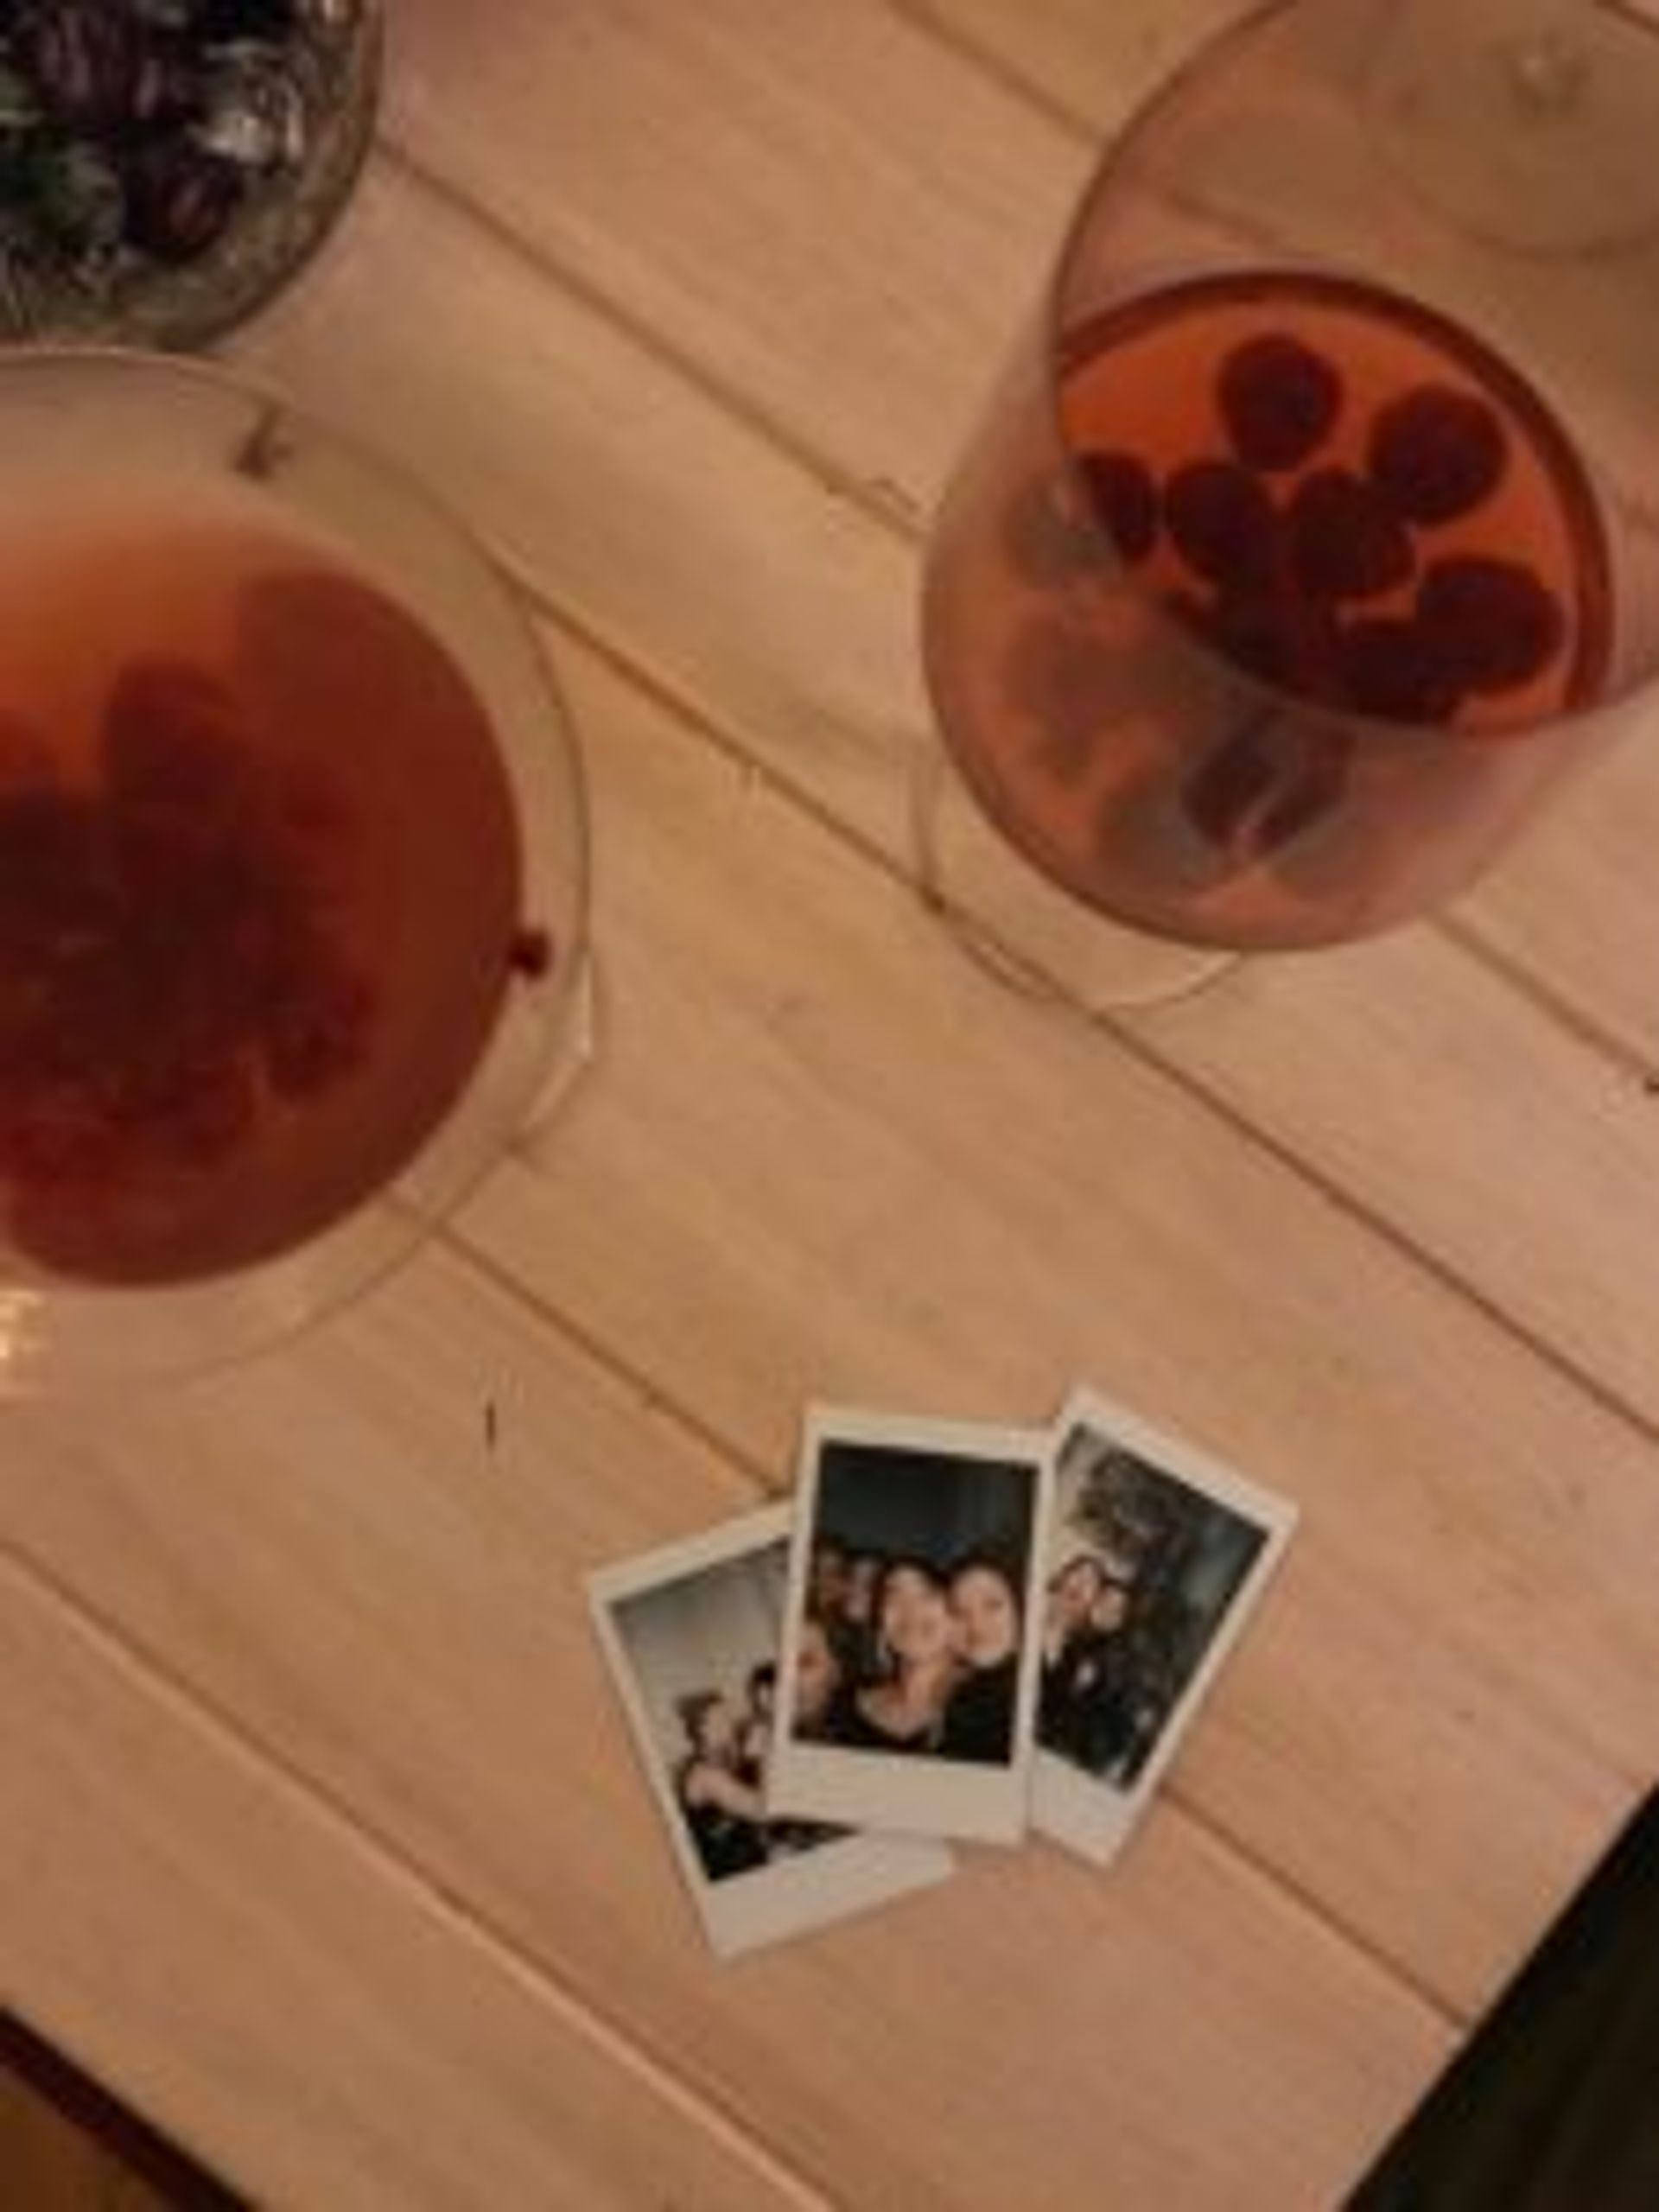 Two wine glasses and there Polaroid photos on a table.